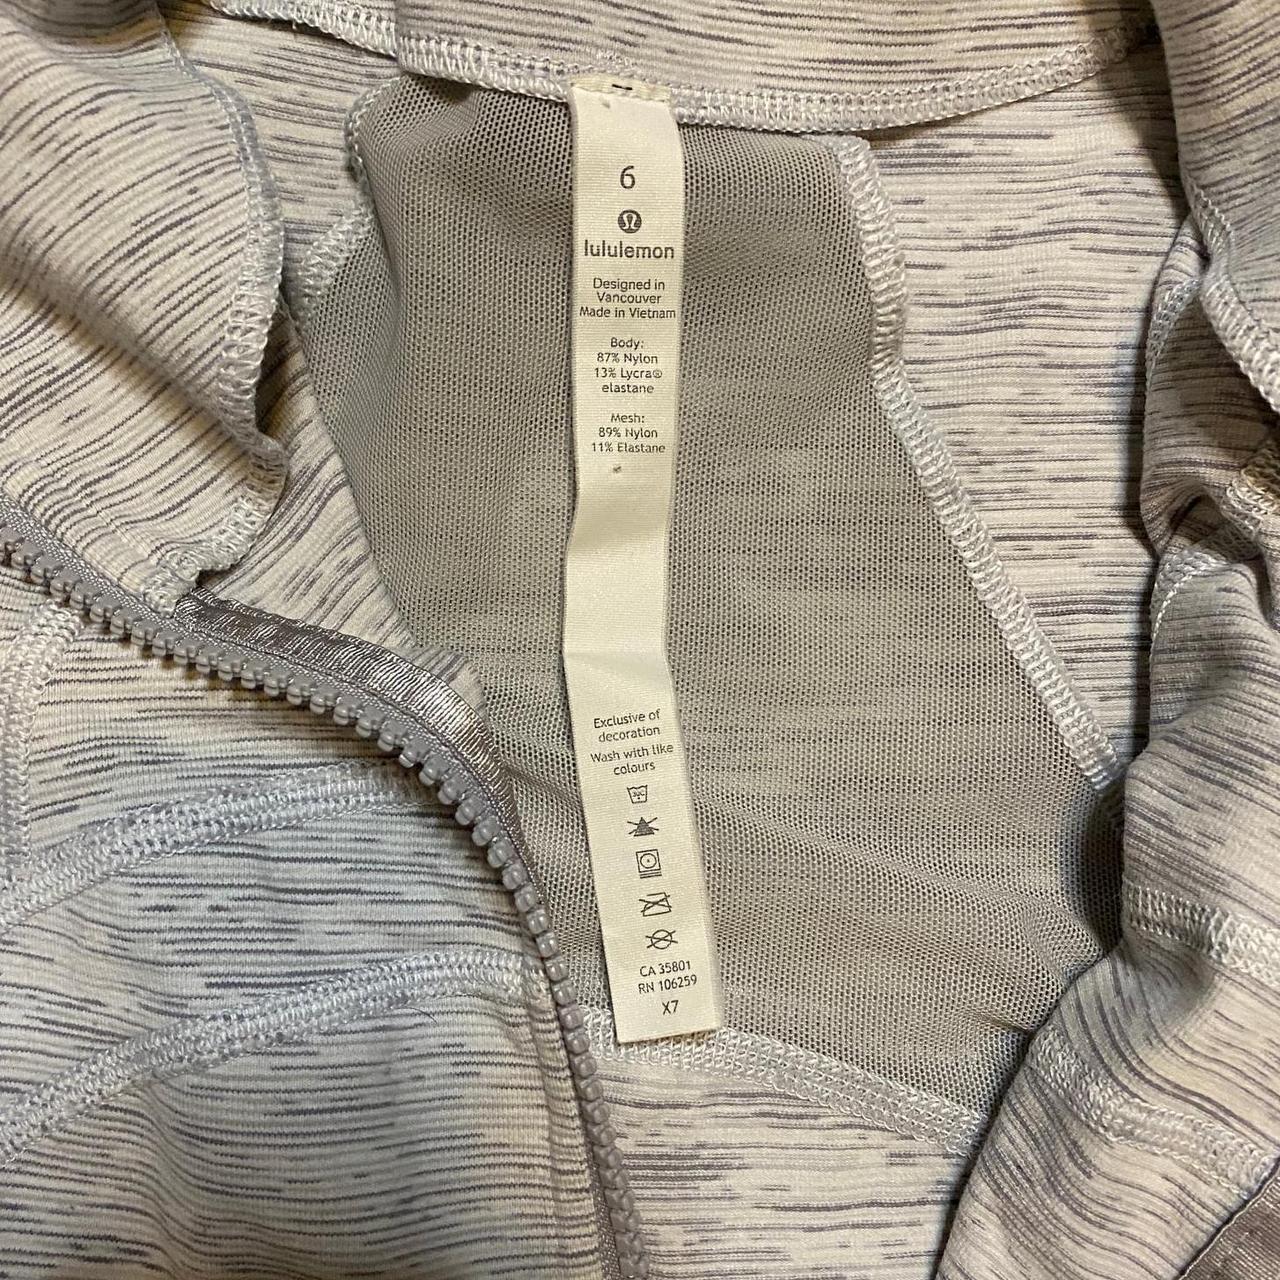 Lululemon Athletica Full Zip up Jacket CA 35801/RN 106259 E4 Sz 6 See  Pictures